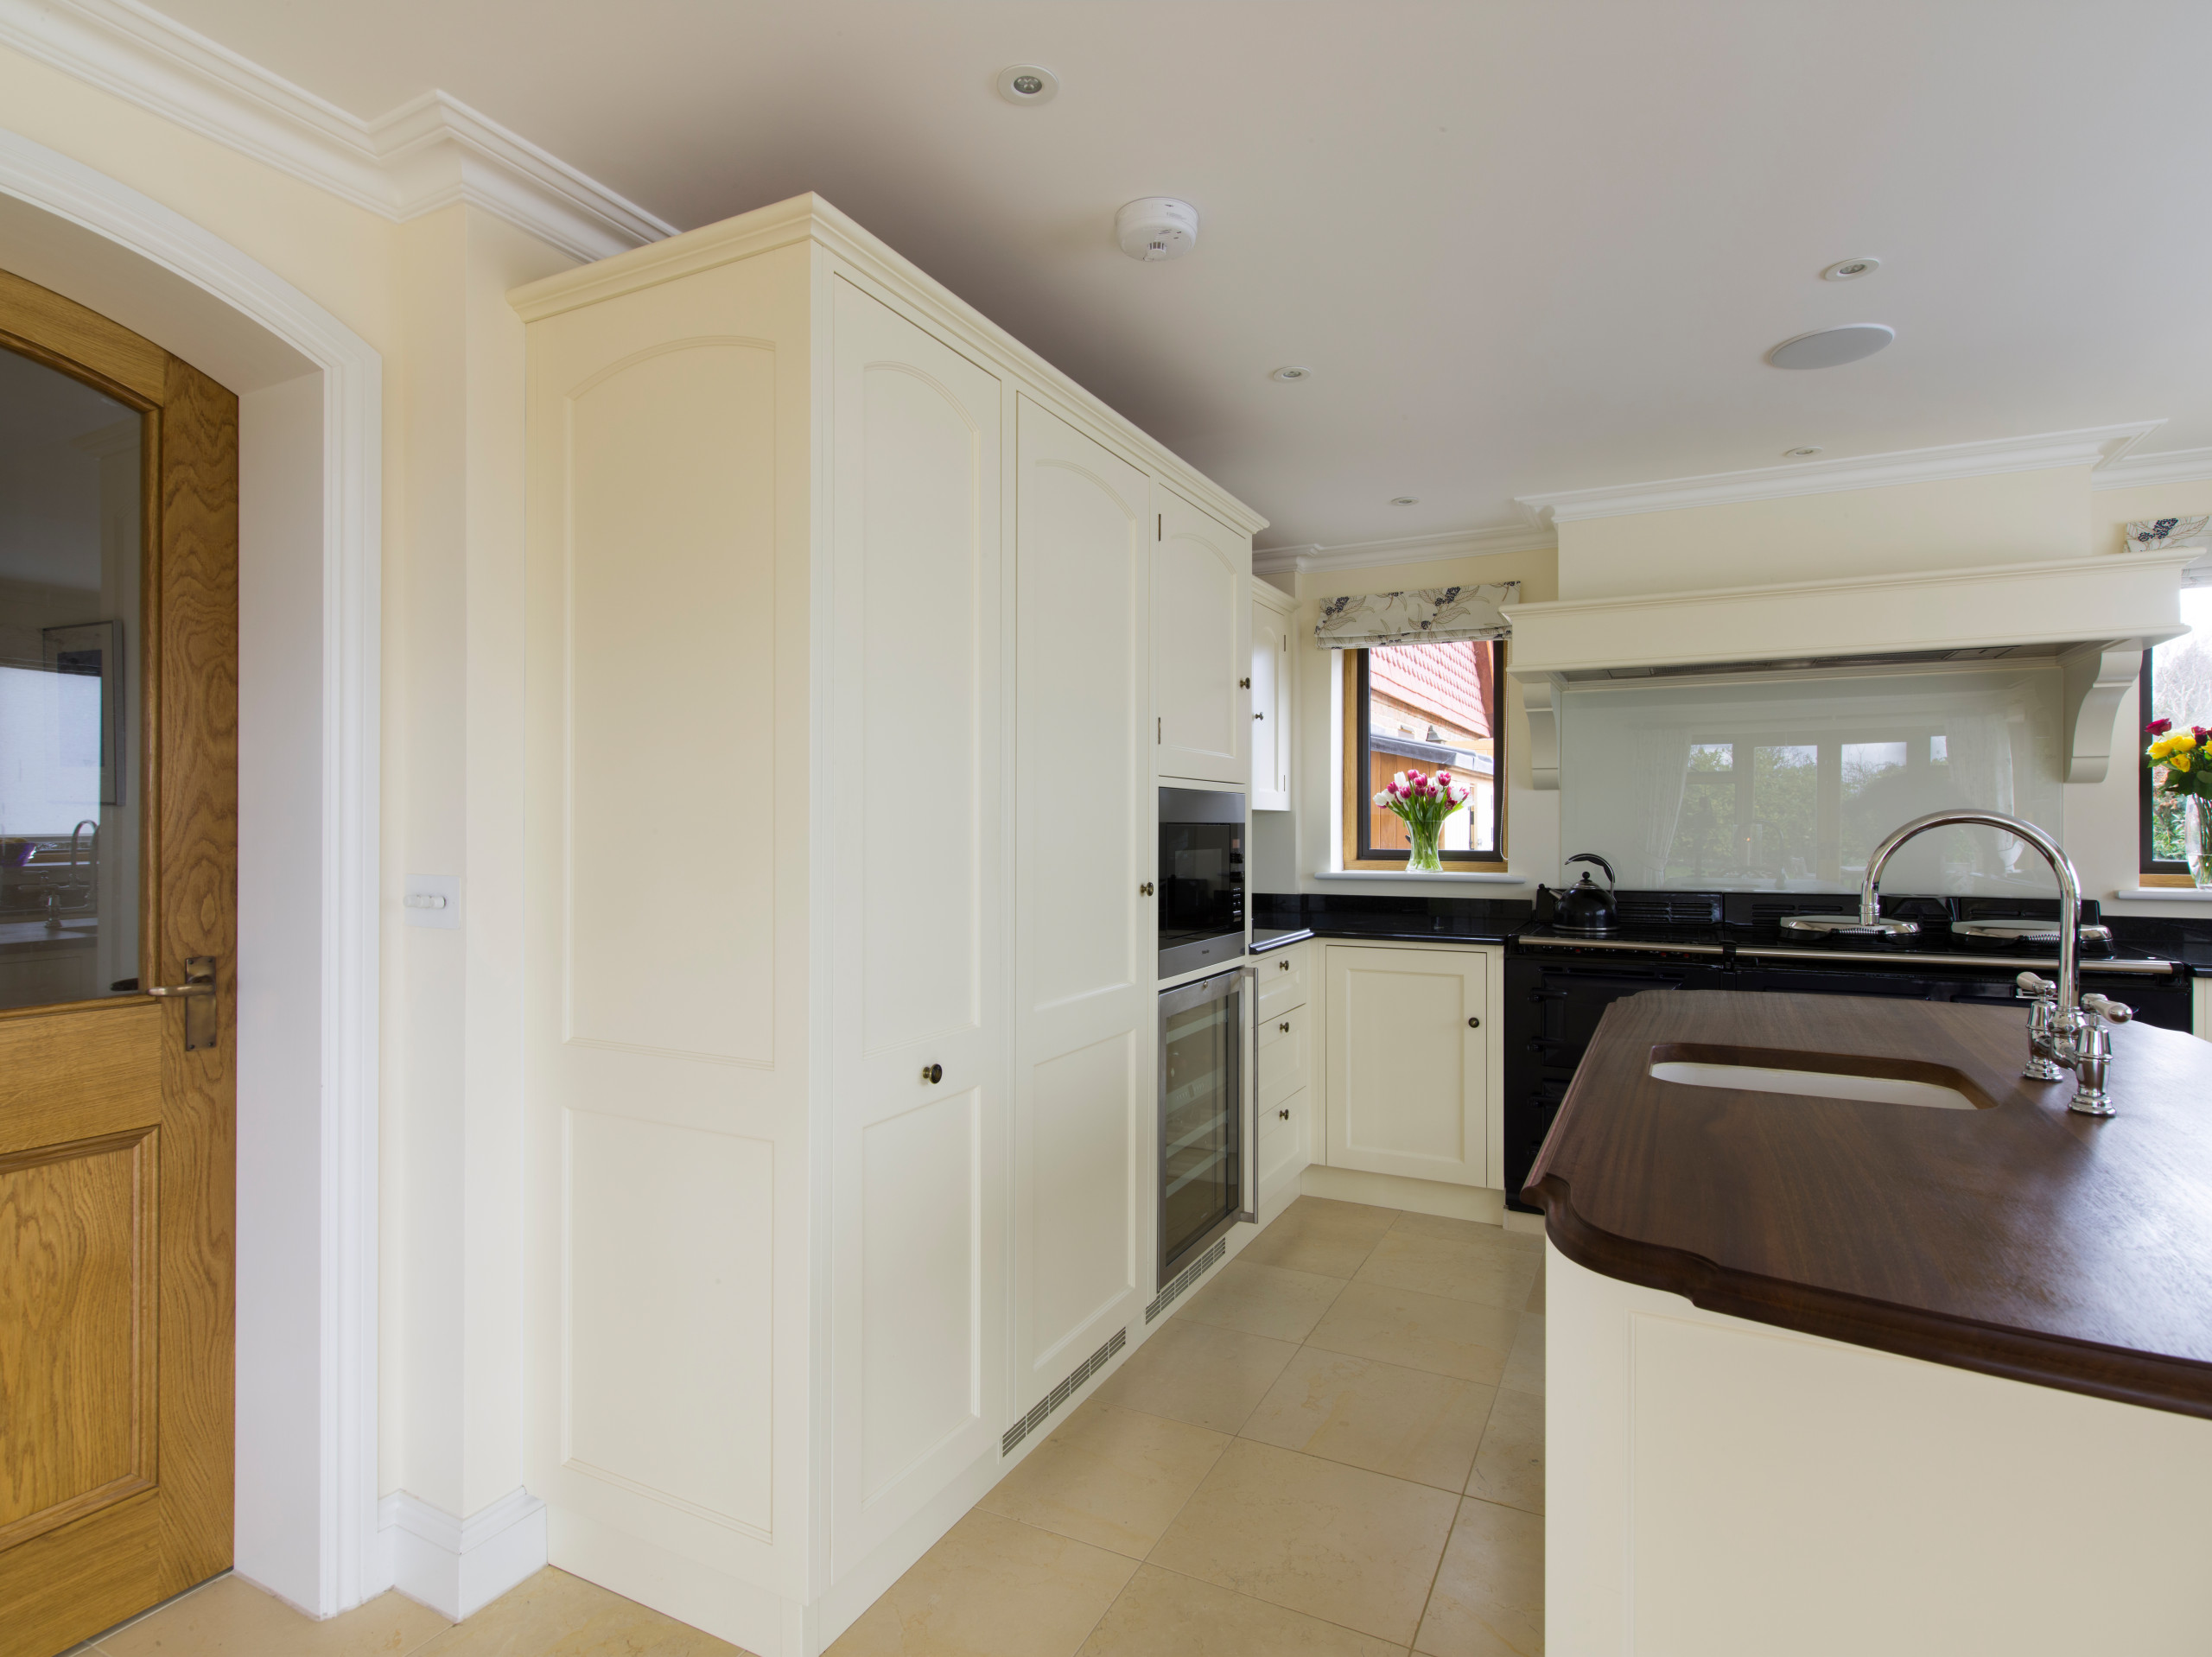 Guildford painted kitchen designed and made by Tim Wood